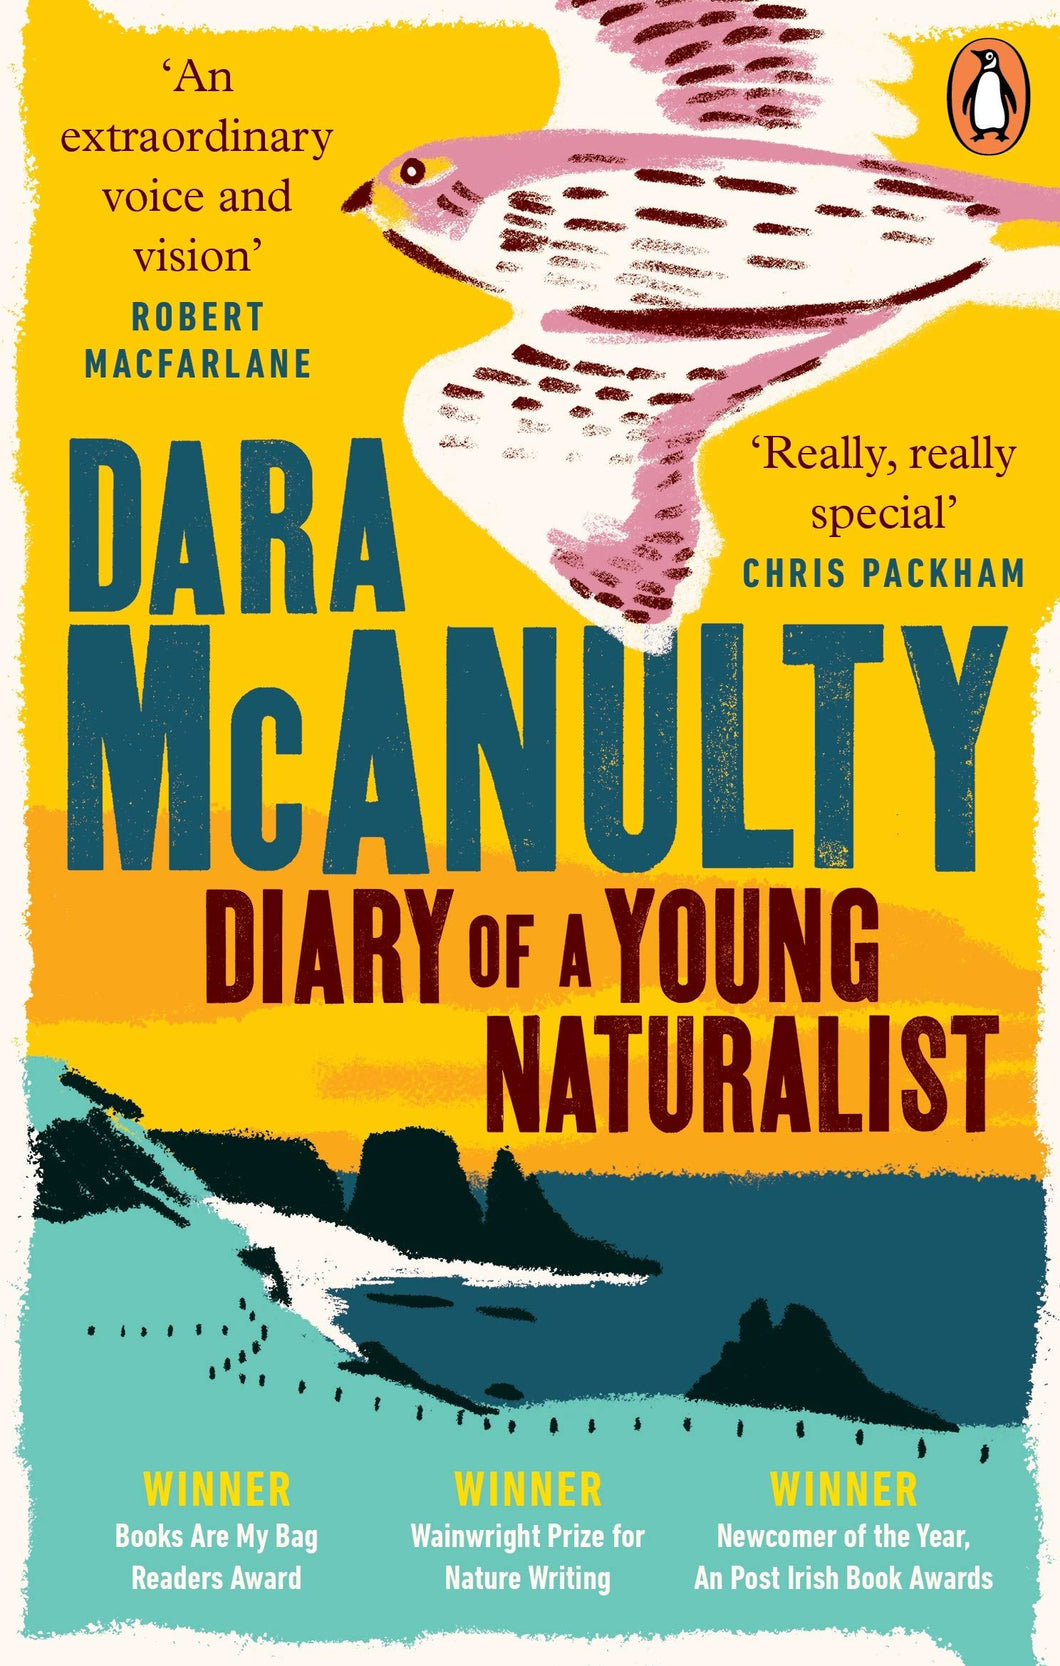 Book cover shows a yellow sky, blue water and coast. Quotes on the cover read 'an extraordinary voice and vision' (Robert MacFarlane), 'really, really special' (Chris Packham). An illustrated bird flies across the top.